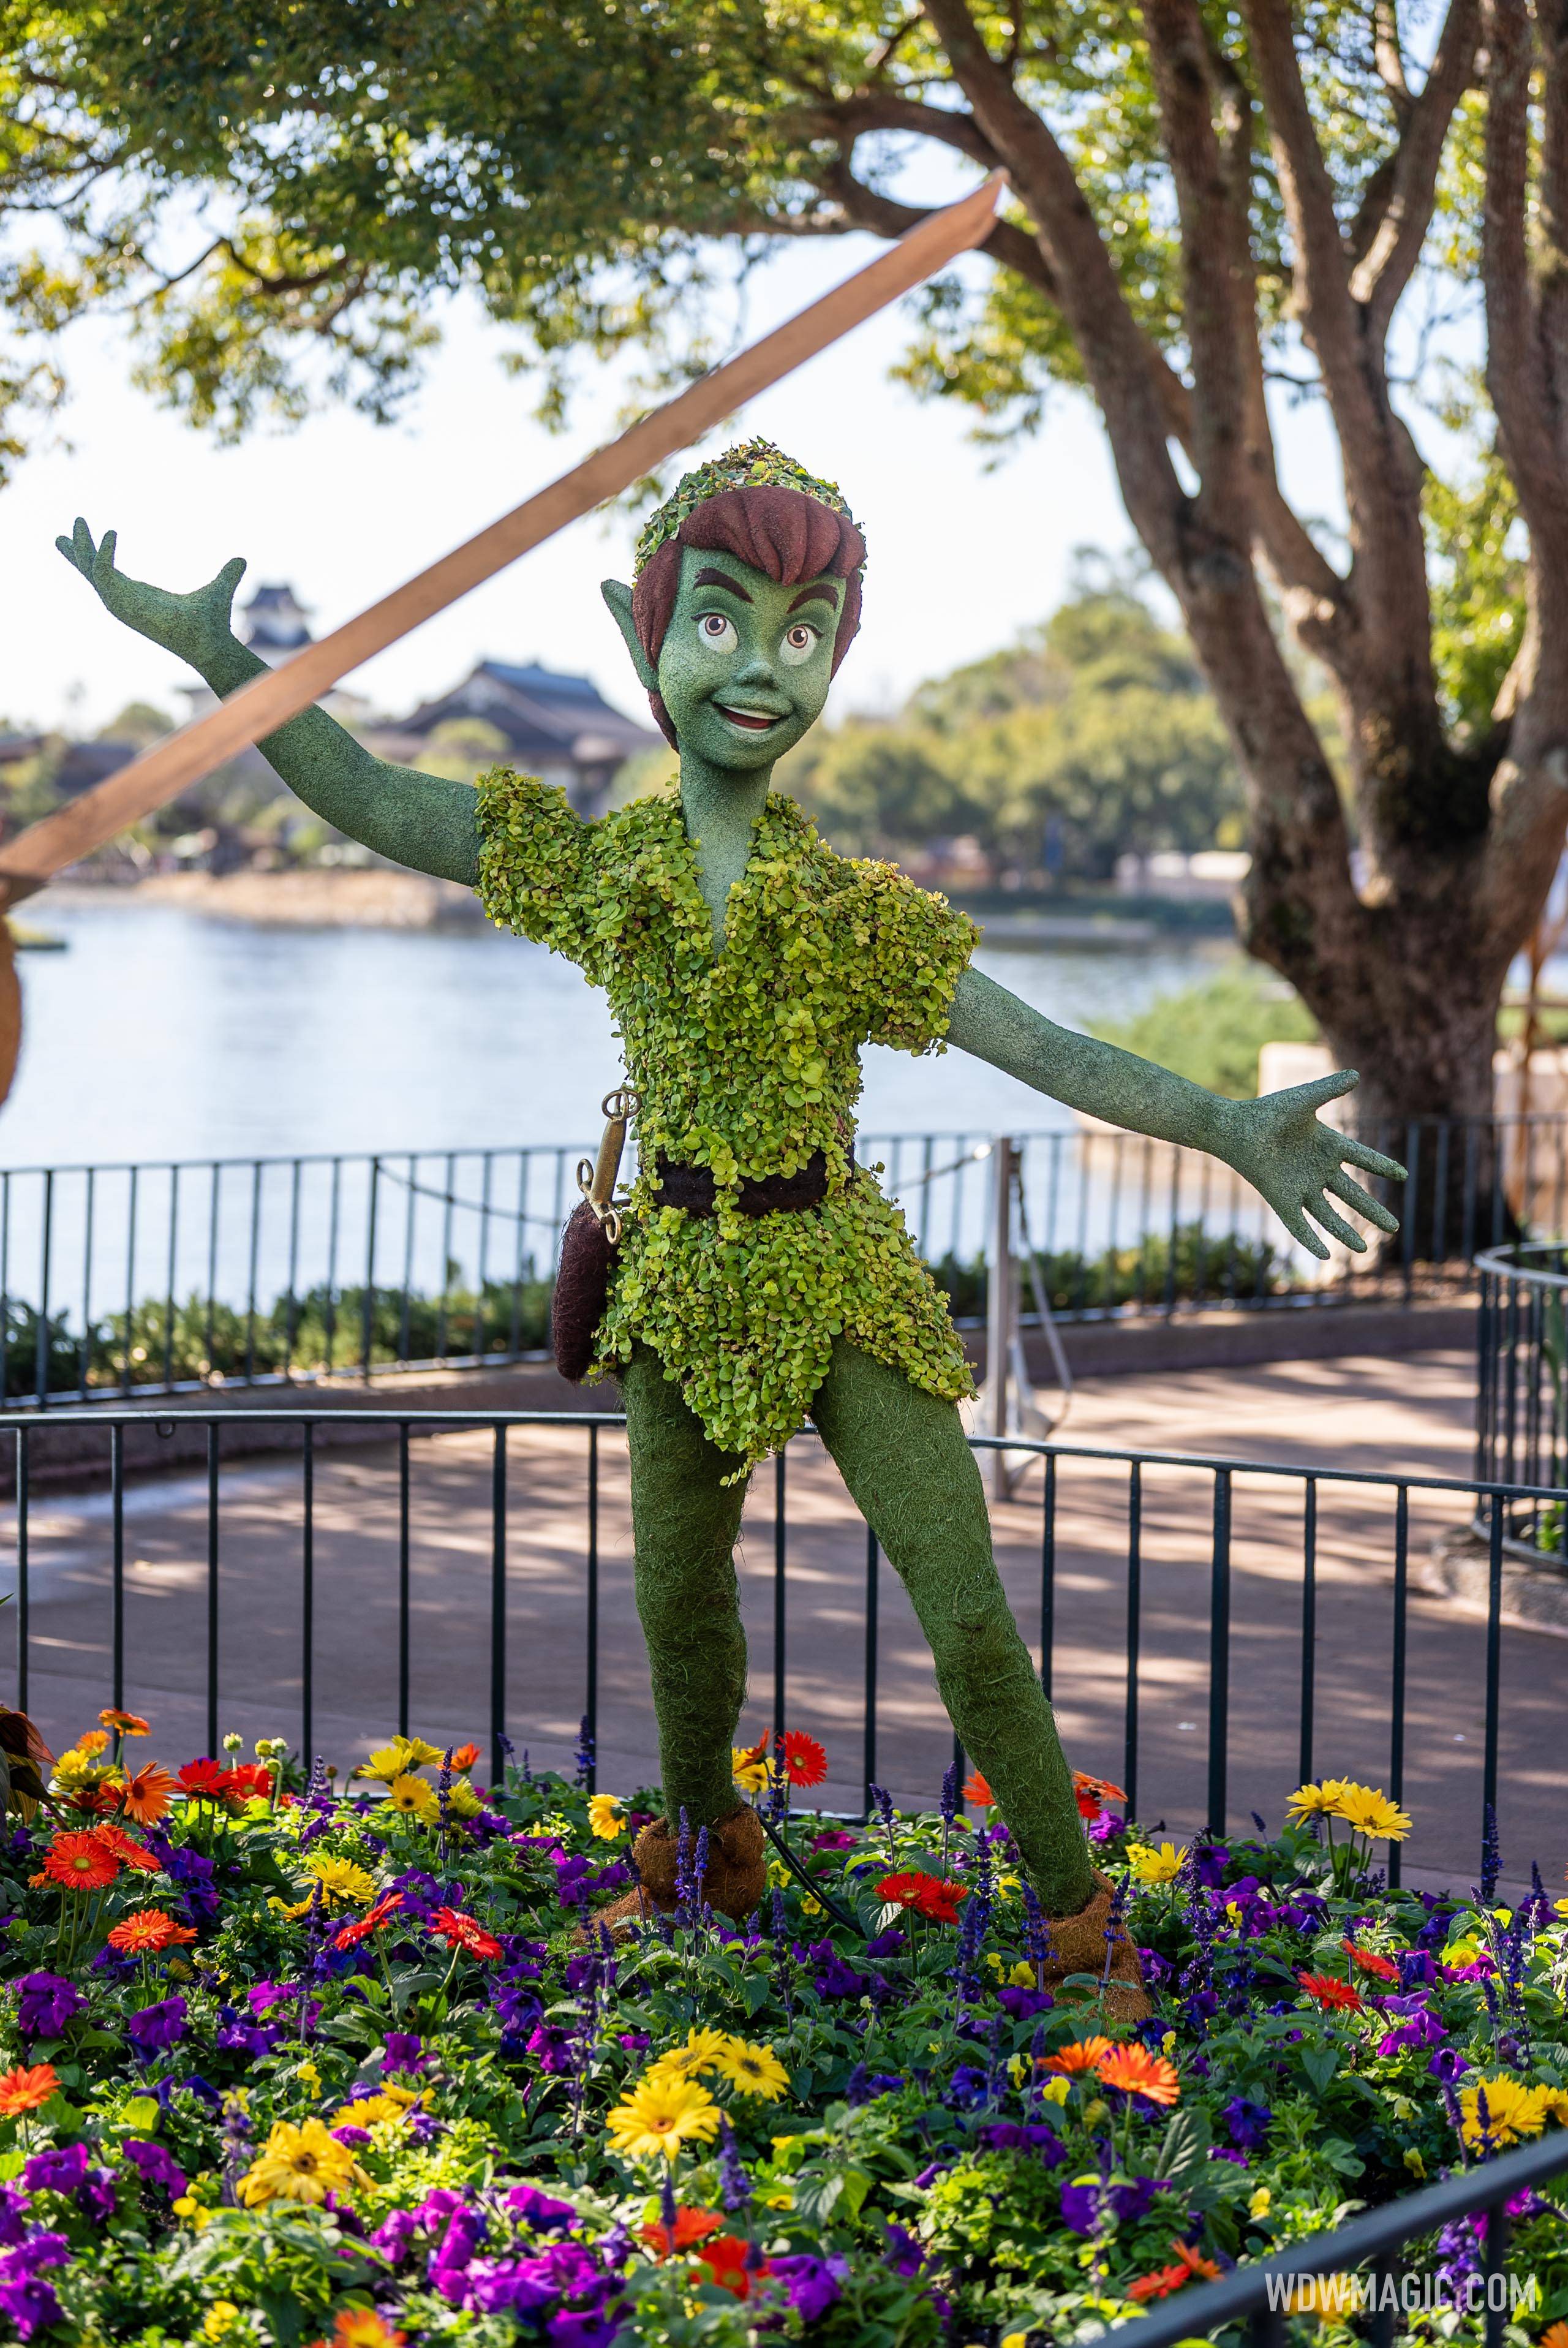 Peter Pan, World Showcase – Between United Kingdom and Canada Pavilion